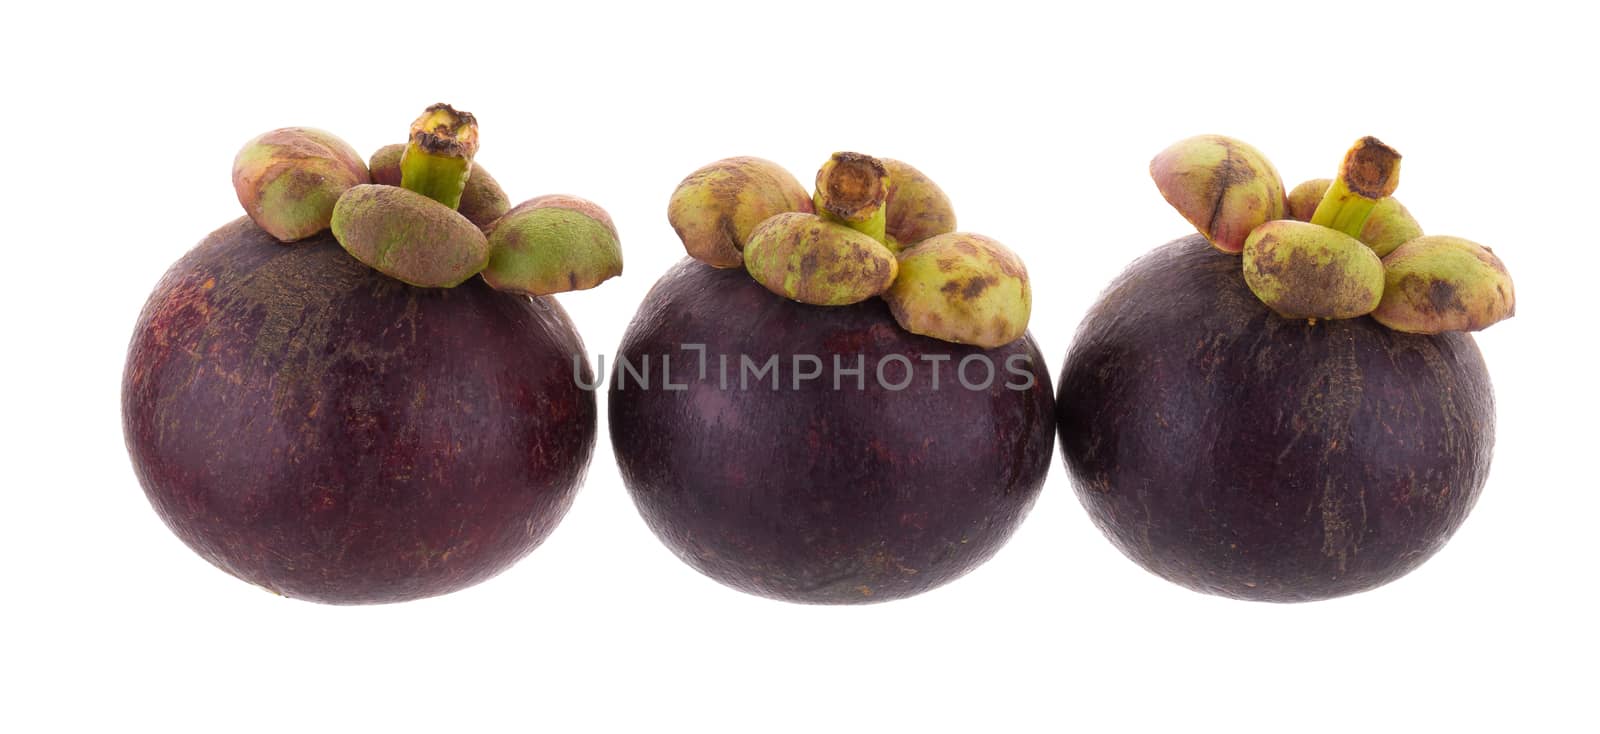 Mangosteens Queen of fruits, ripe mangosteen fruit isolated on white background.